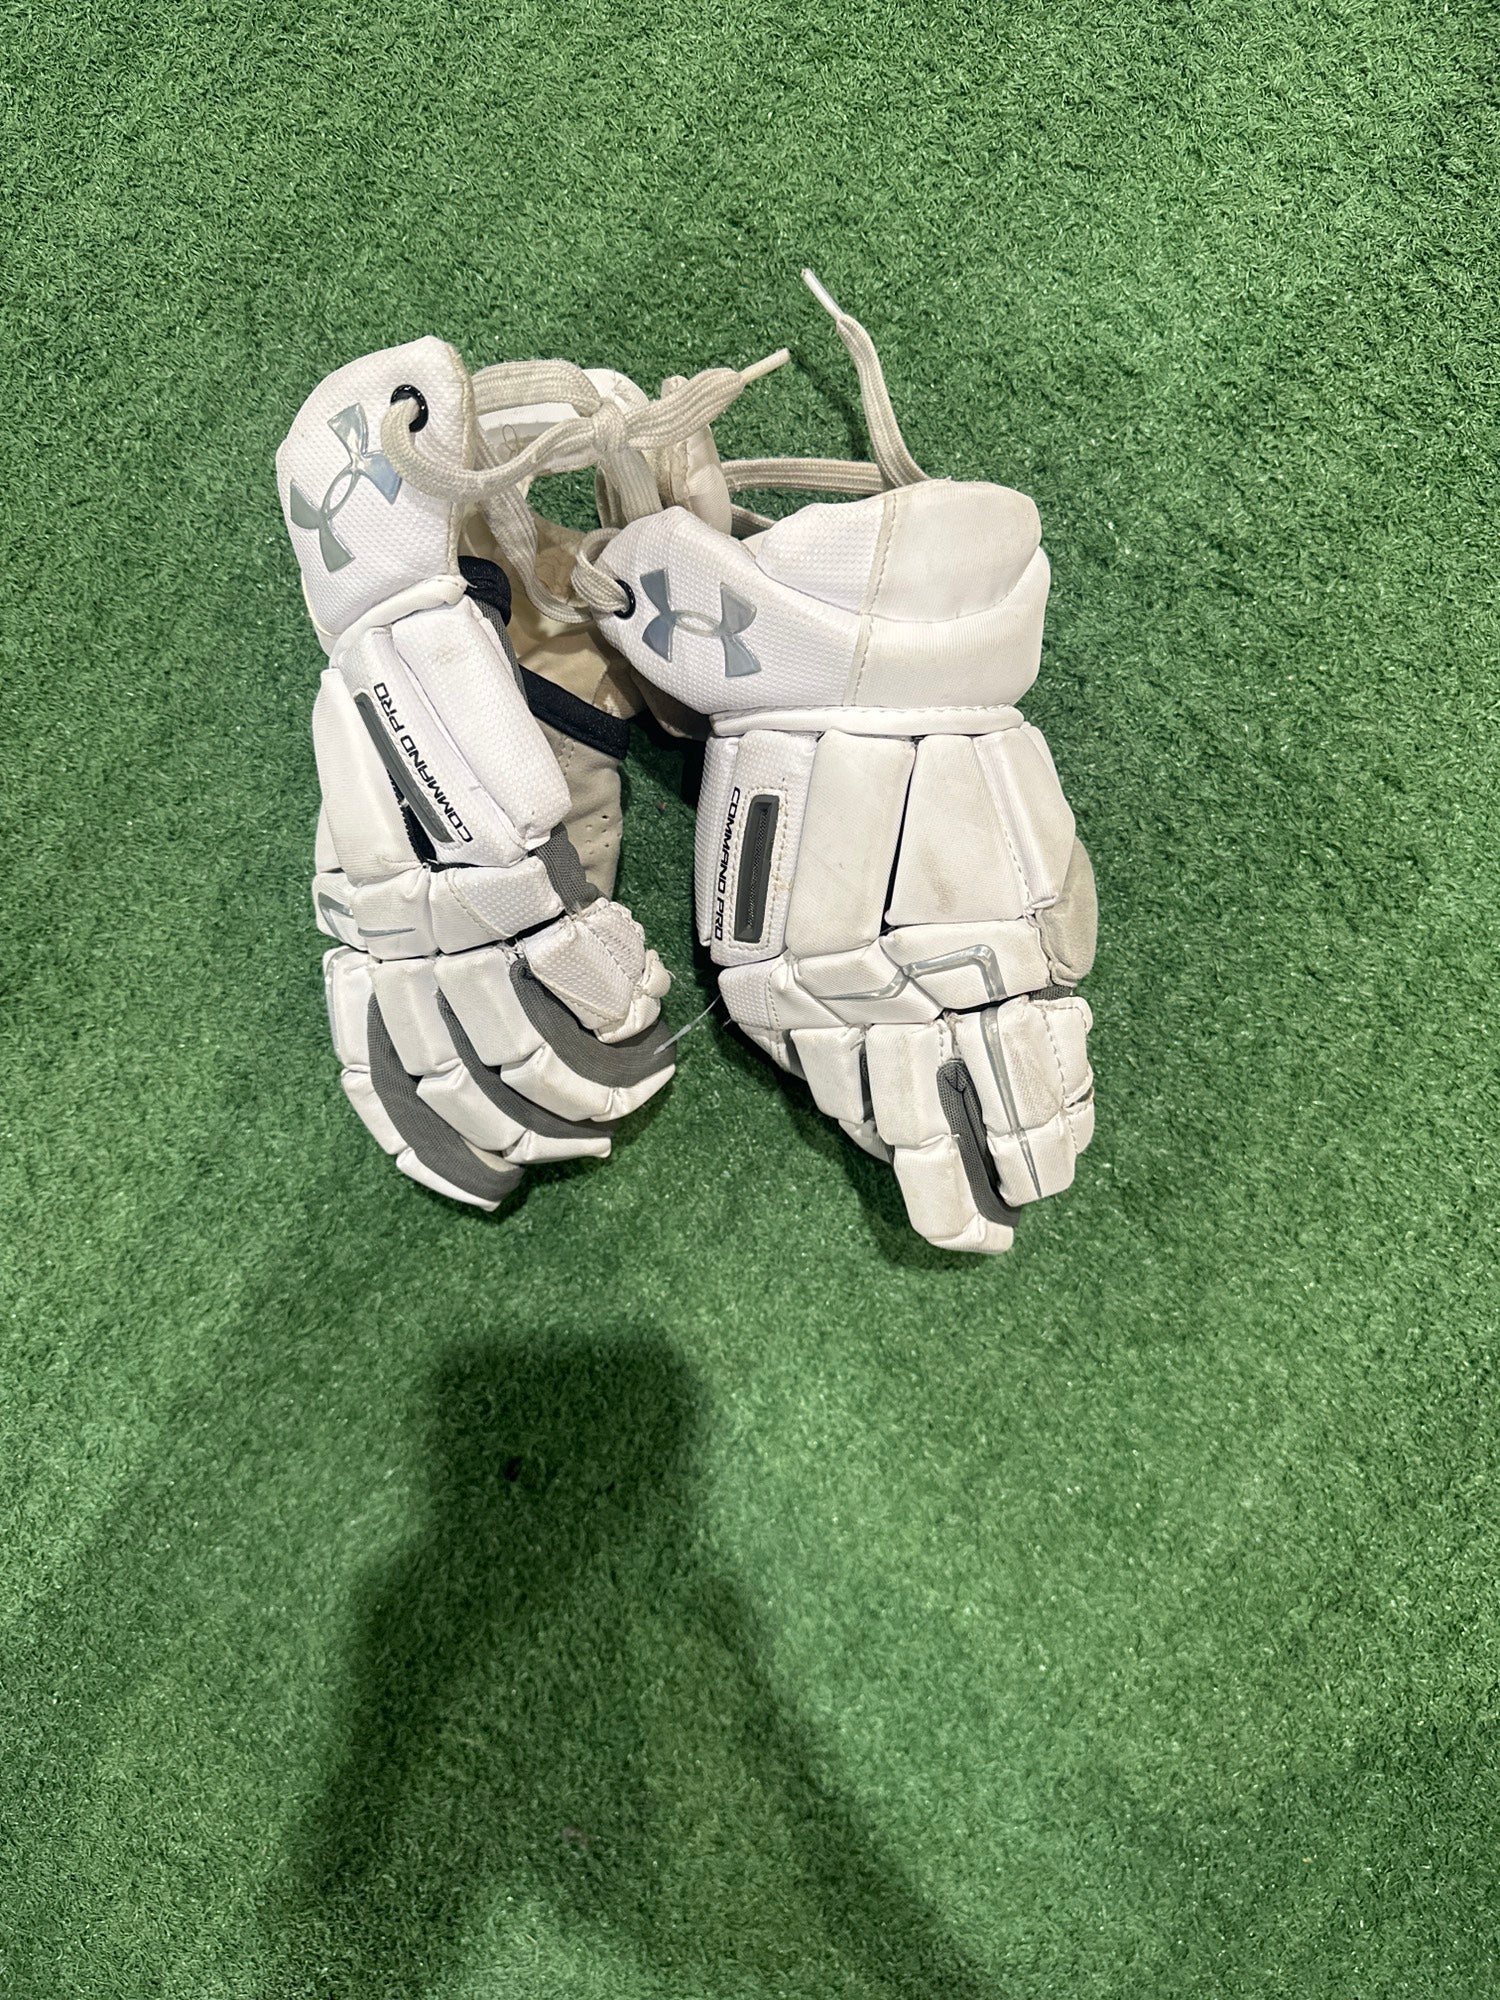 Used Under Armour Command Pro Lacrosse Gloves 10